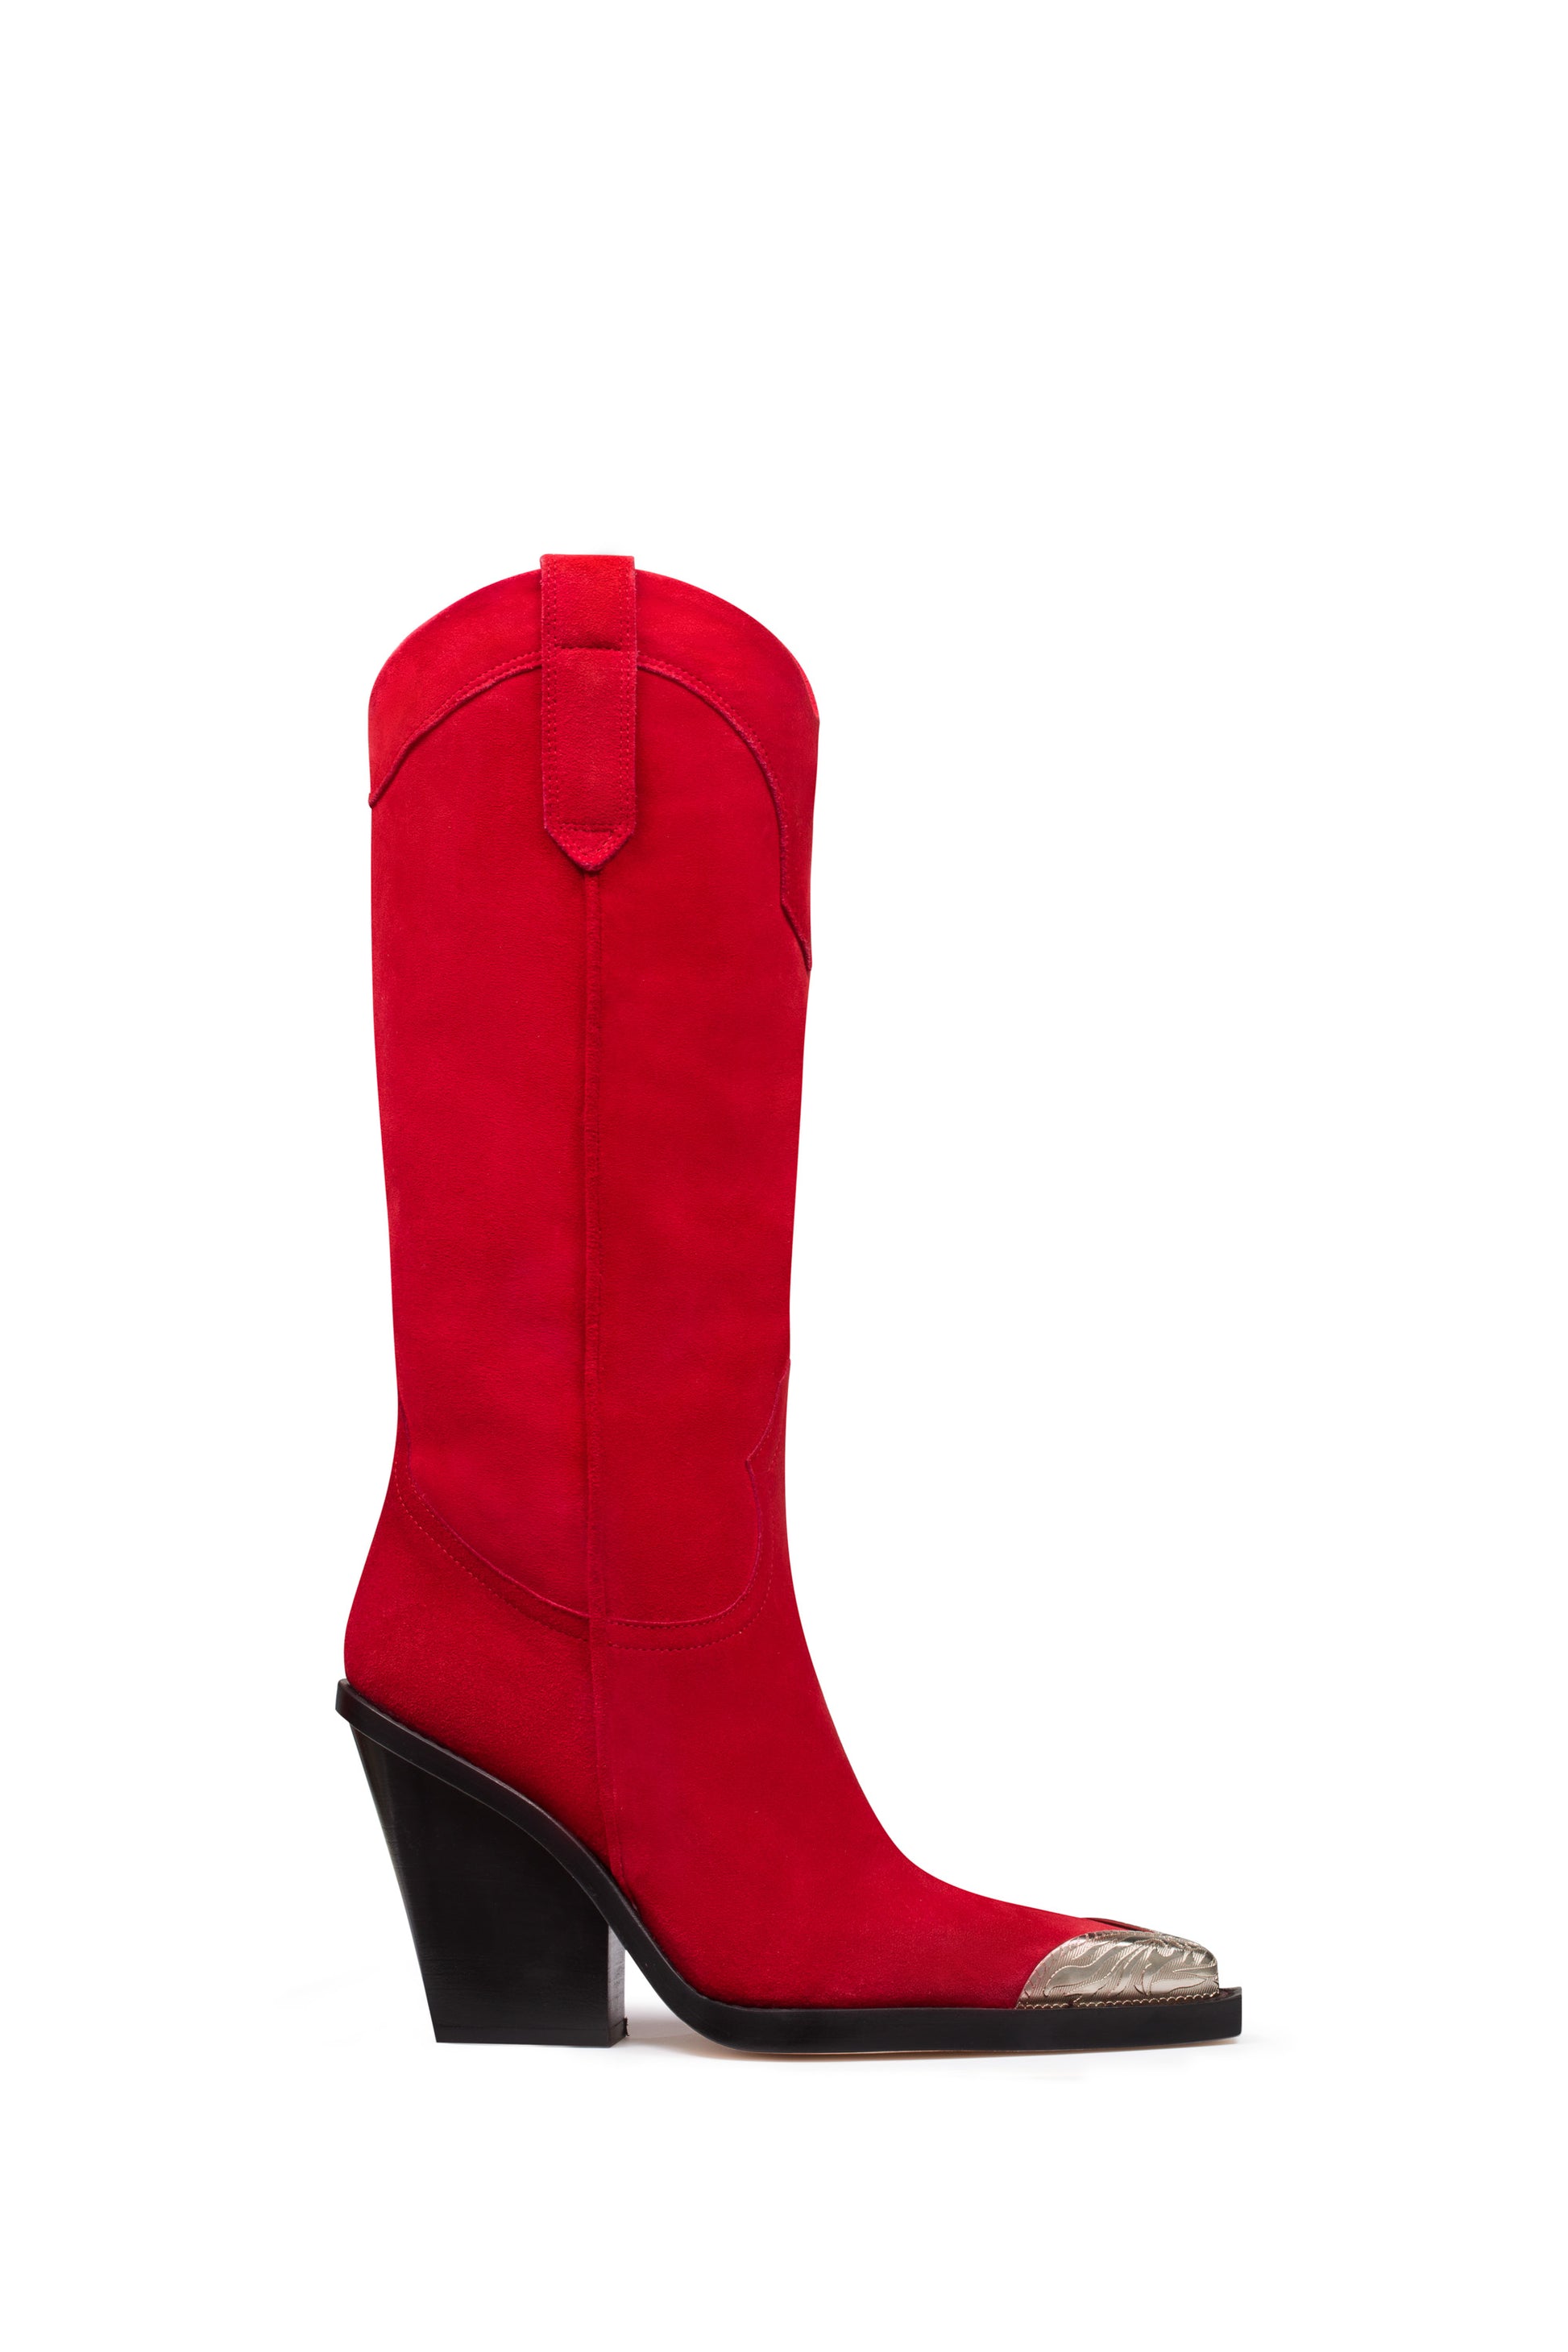 Red calf suede boots with metallic toe - Main side